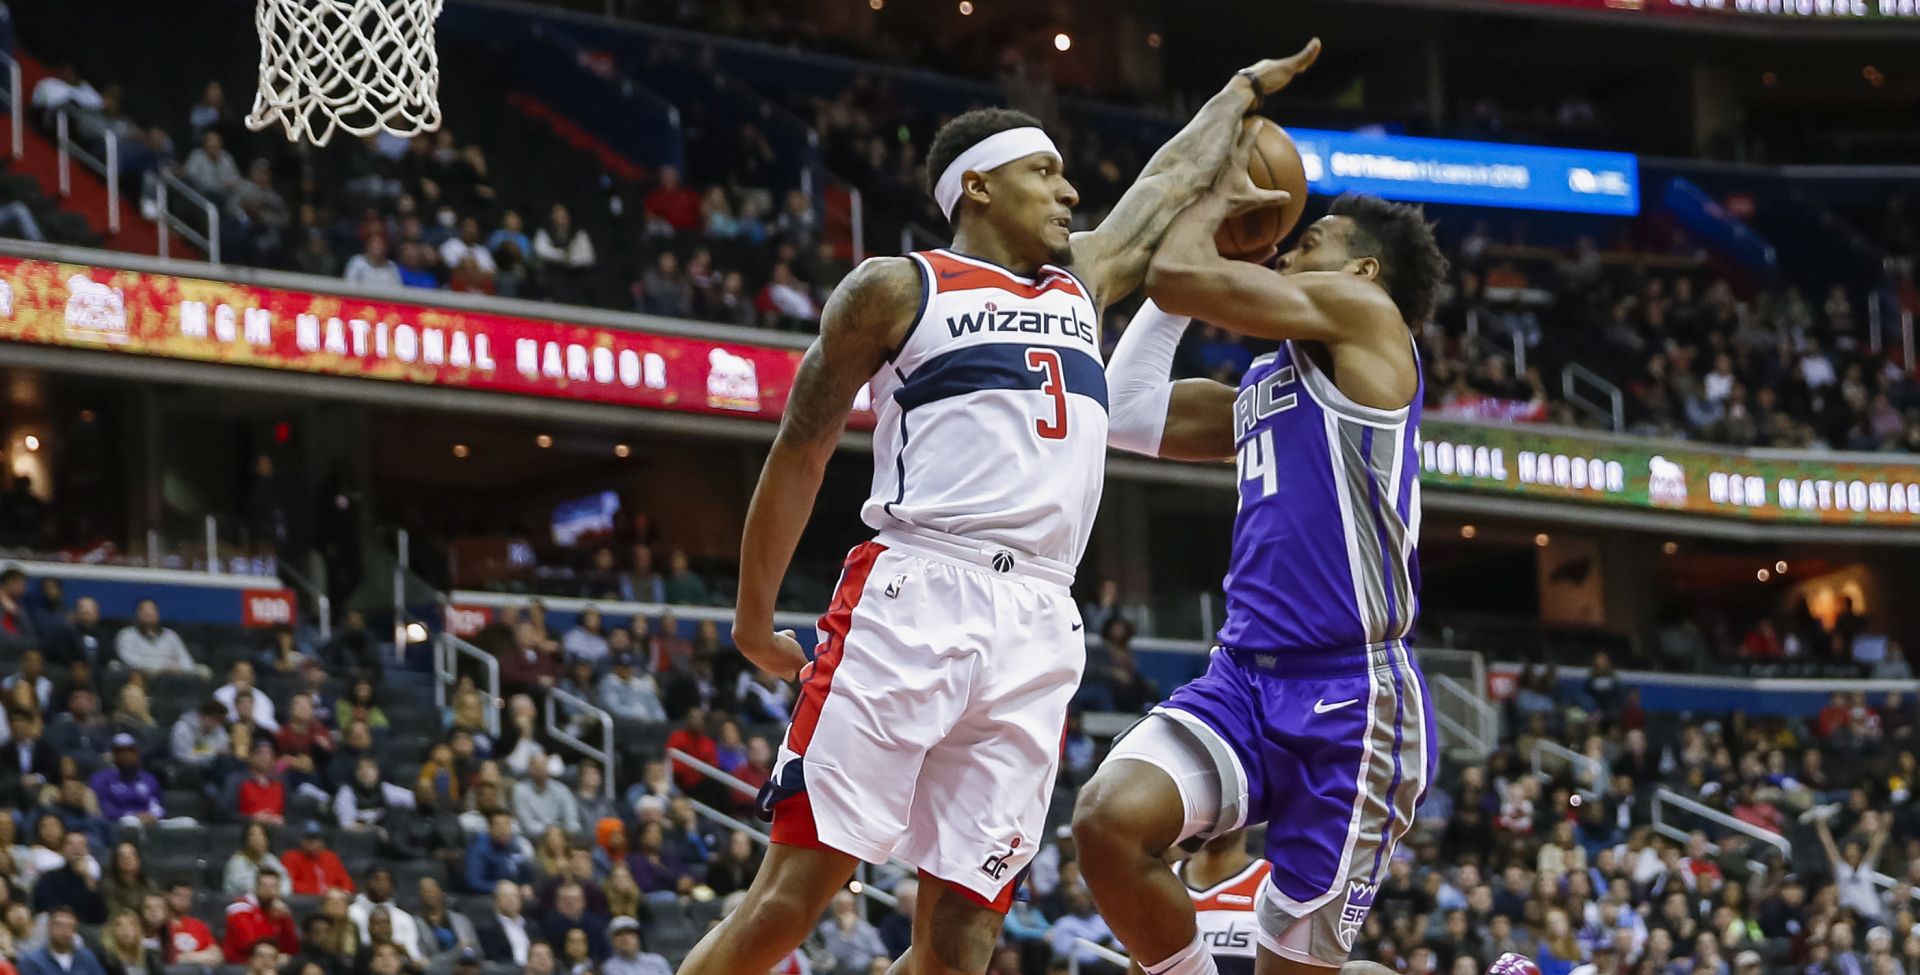 epa07430013 Sacramento Kings guard Buddy Hield (R) of the Bahamas in action against Washington Wizards guard Bradley Beal (L) during the second half of the NBA basketball game between the Sacramento Kings and the Washington Wizards at CapitalOne Arena in Washington, DC, USA, 11 March 2019.  EPA/ERIK S. LESSER SHUTTERSTOCK OUT